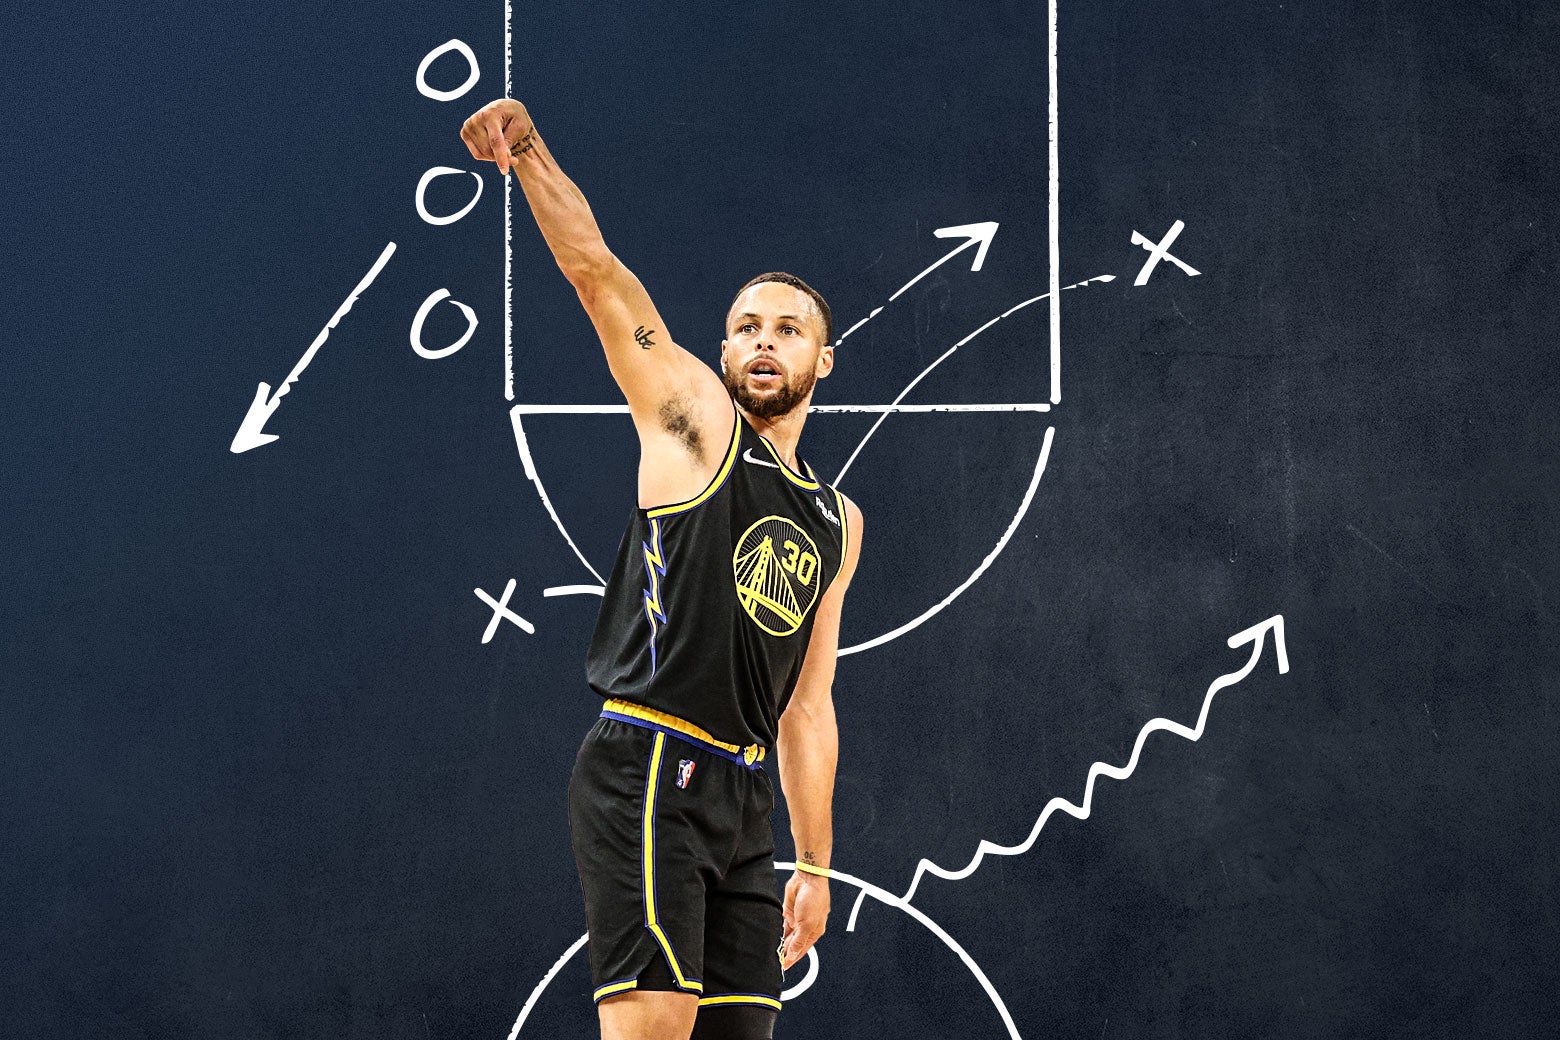 Steph Curry watching his shot, with his arm raised in follow-through, with an Xes and Os basketball play illustrated on a basketball key behind him.